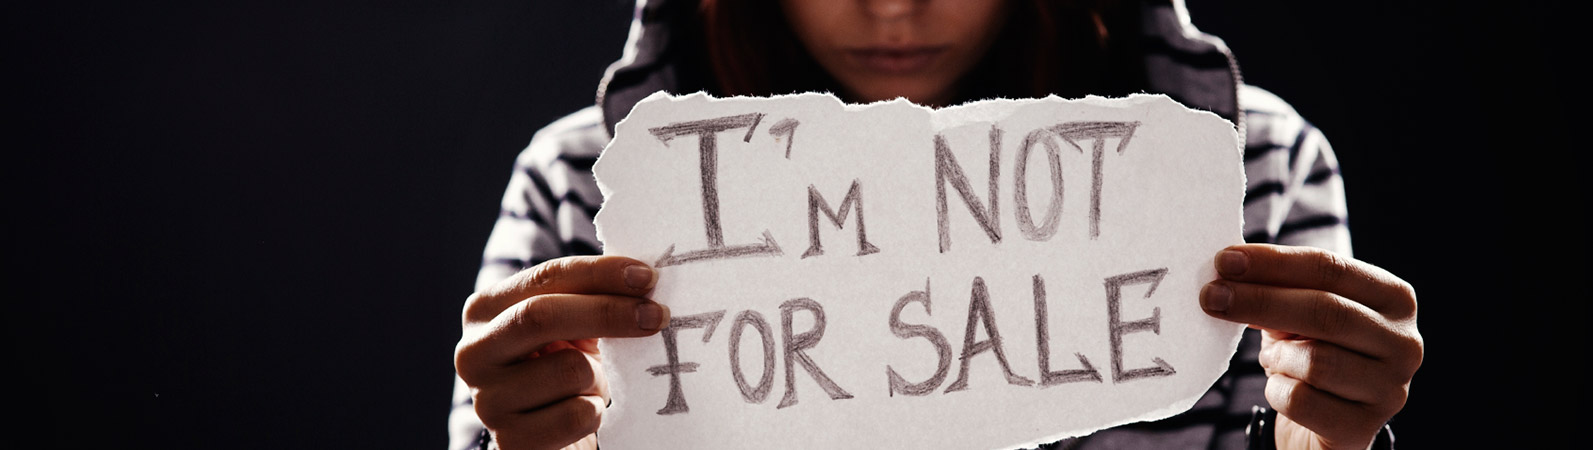 I am Not For Sale - Stop Human Trafficking